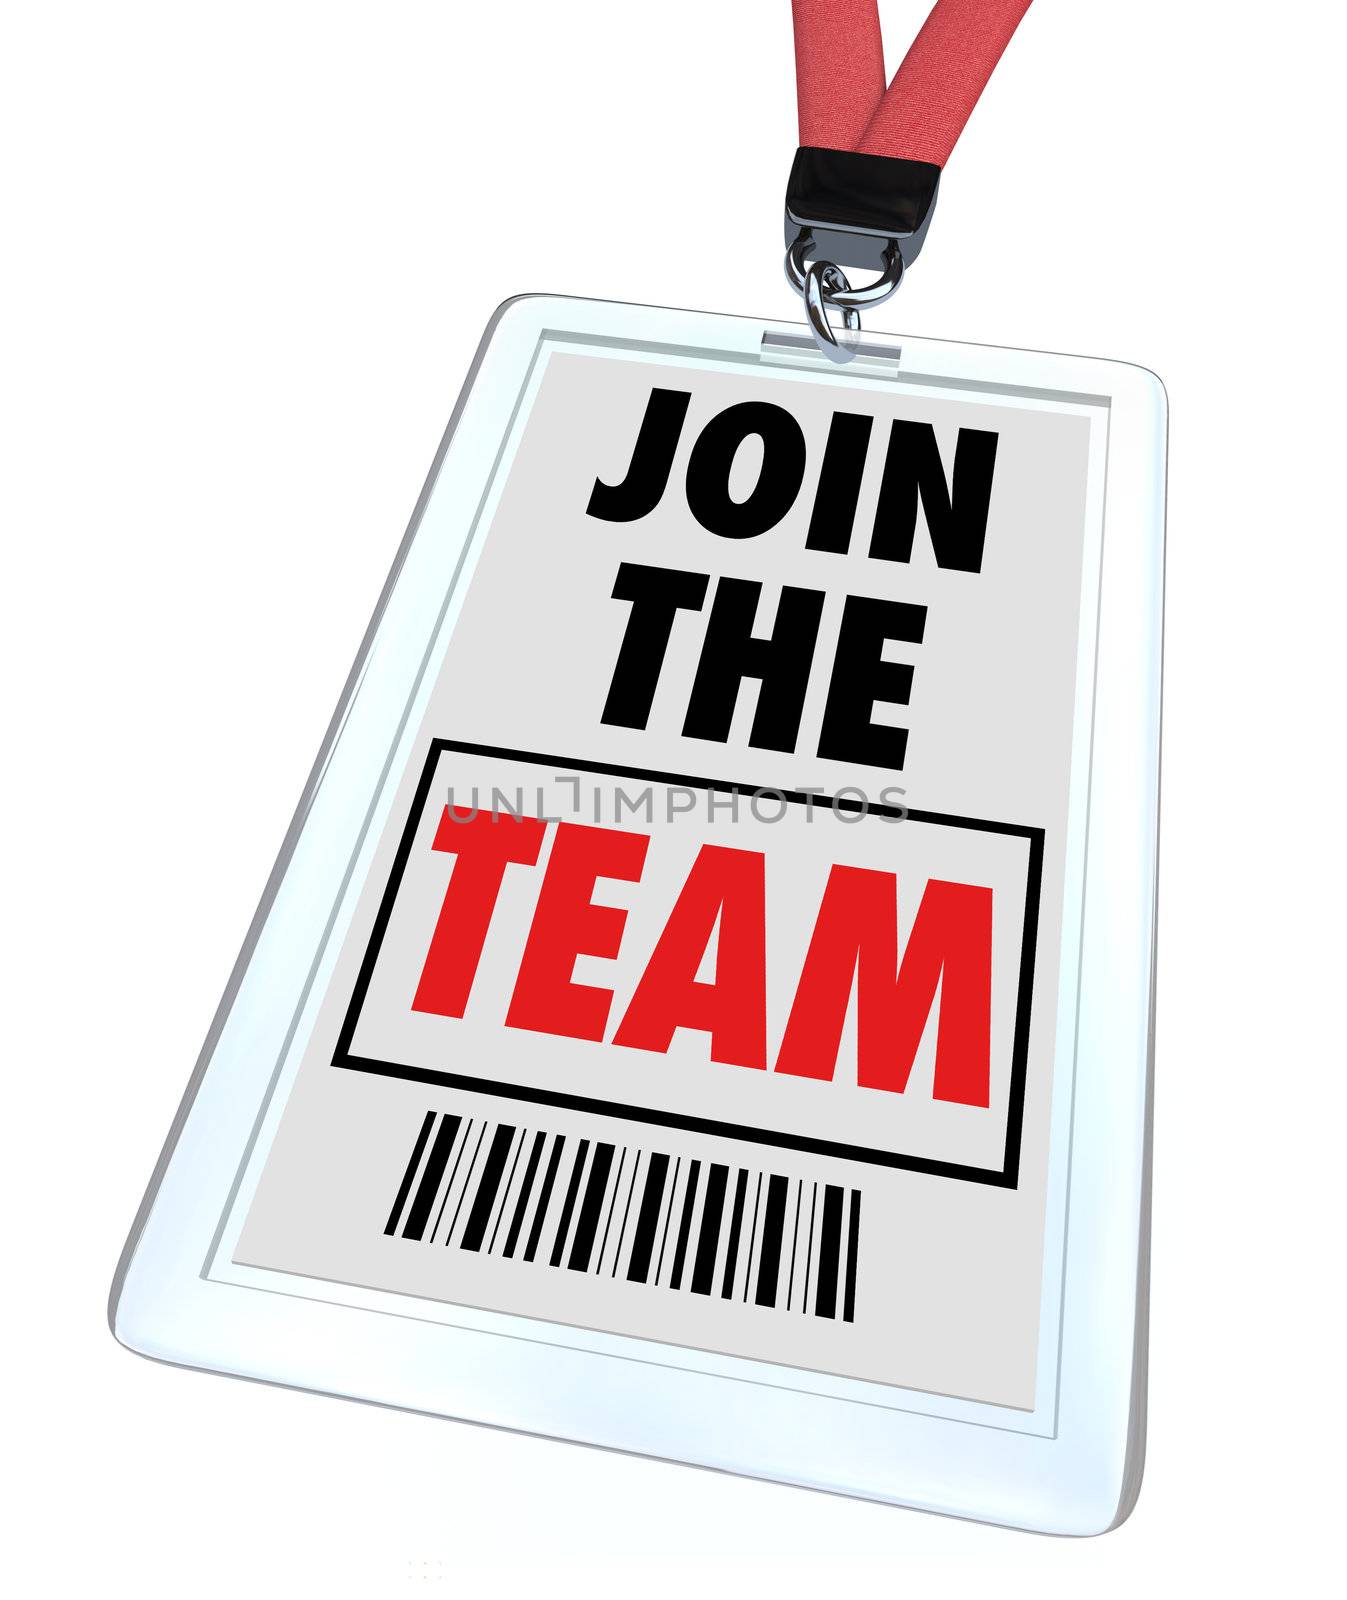 A badge and lanyard with printed pass reading Join the Team, symbolizing getting hired at a job and working toward teamwork